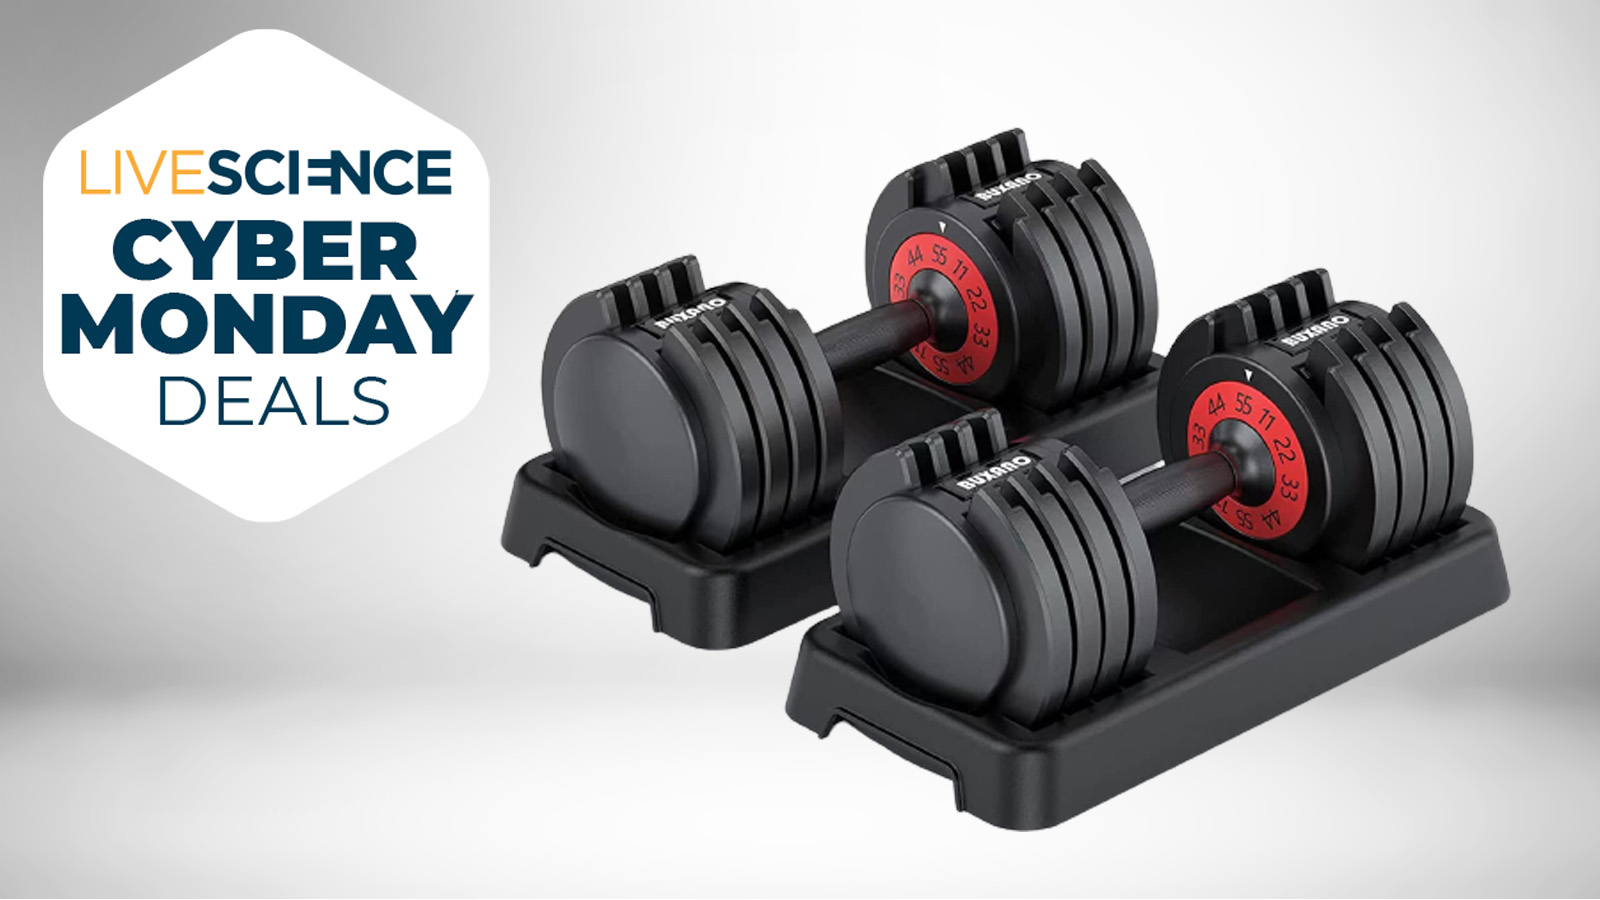 This Cyber Monday deal gets you two adjustable dumbbells for less than the original cost of one